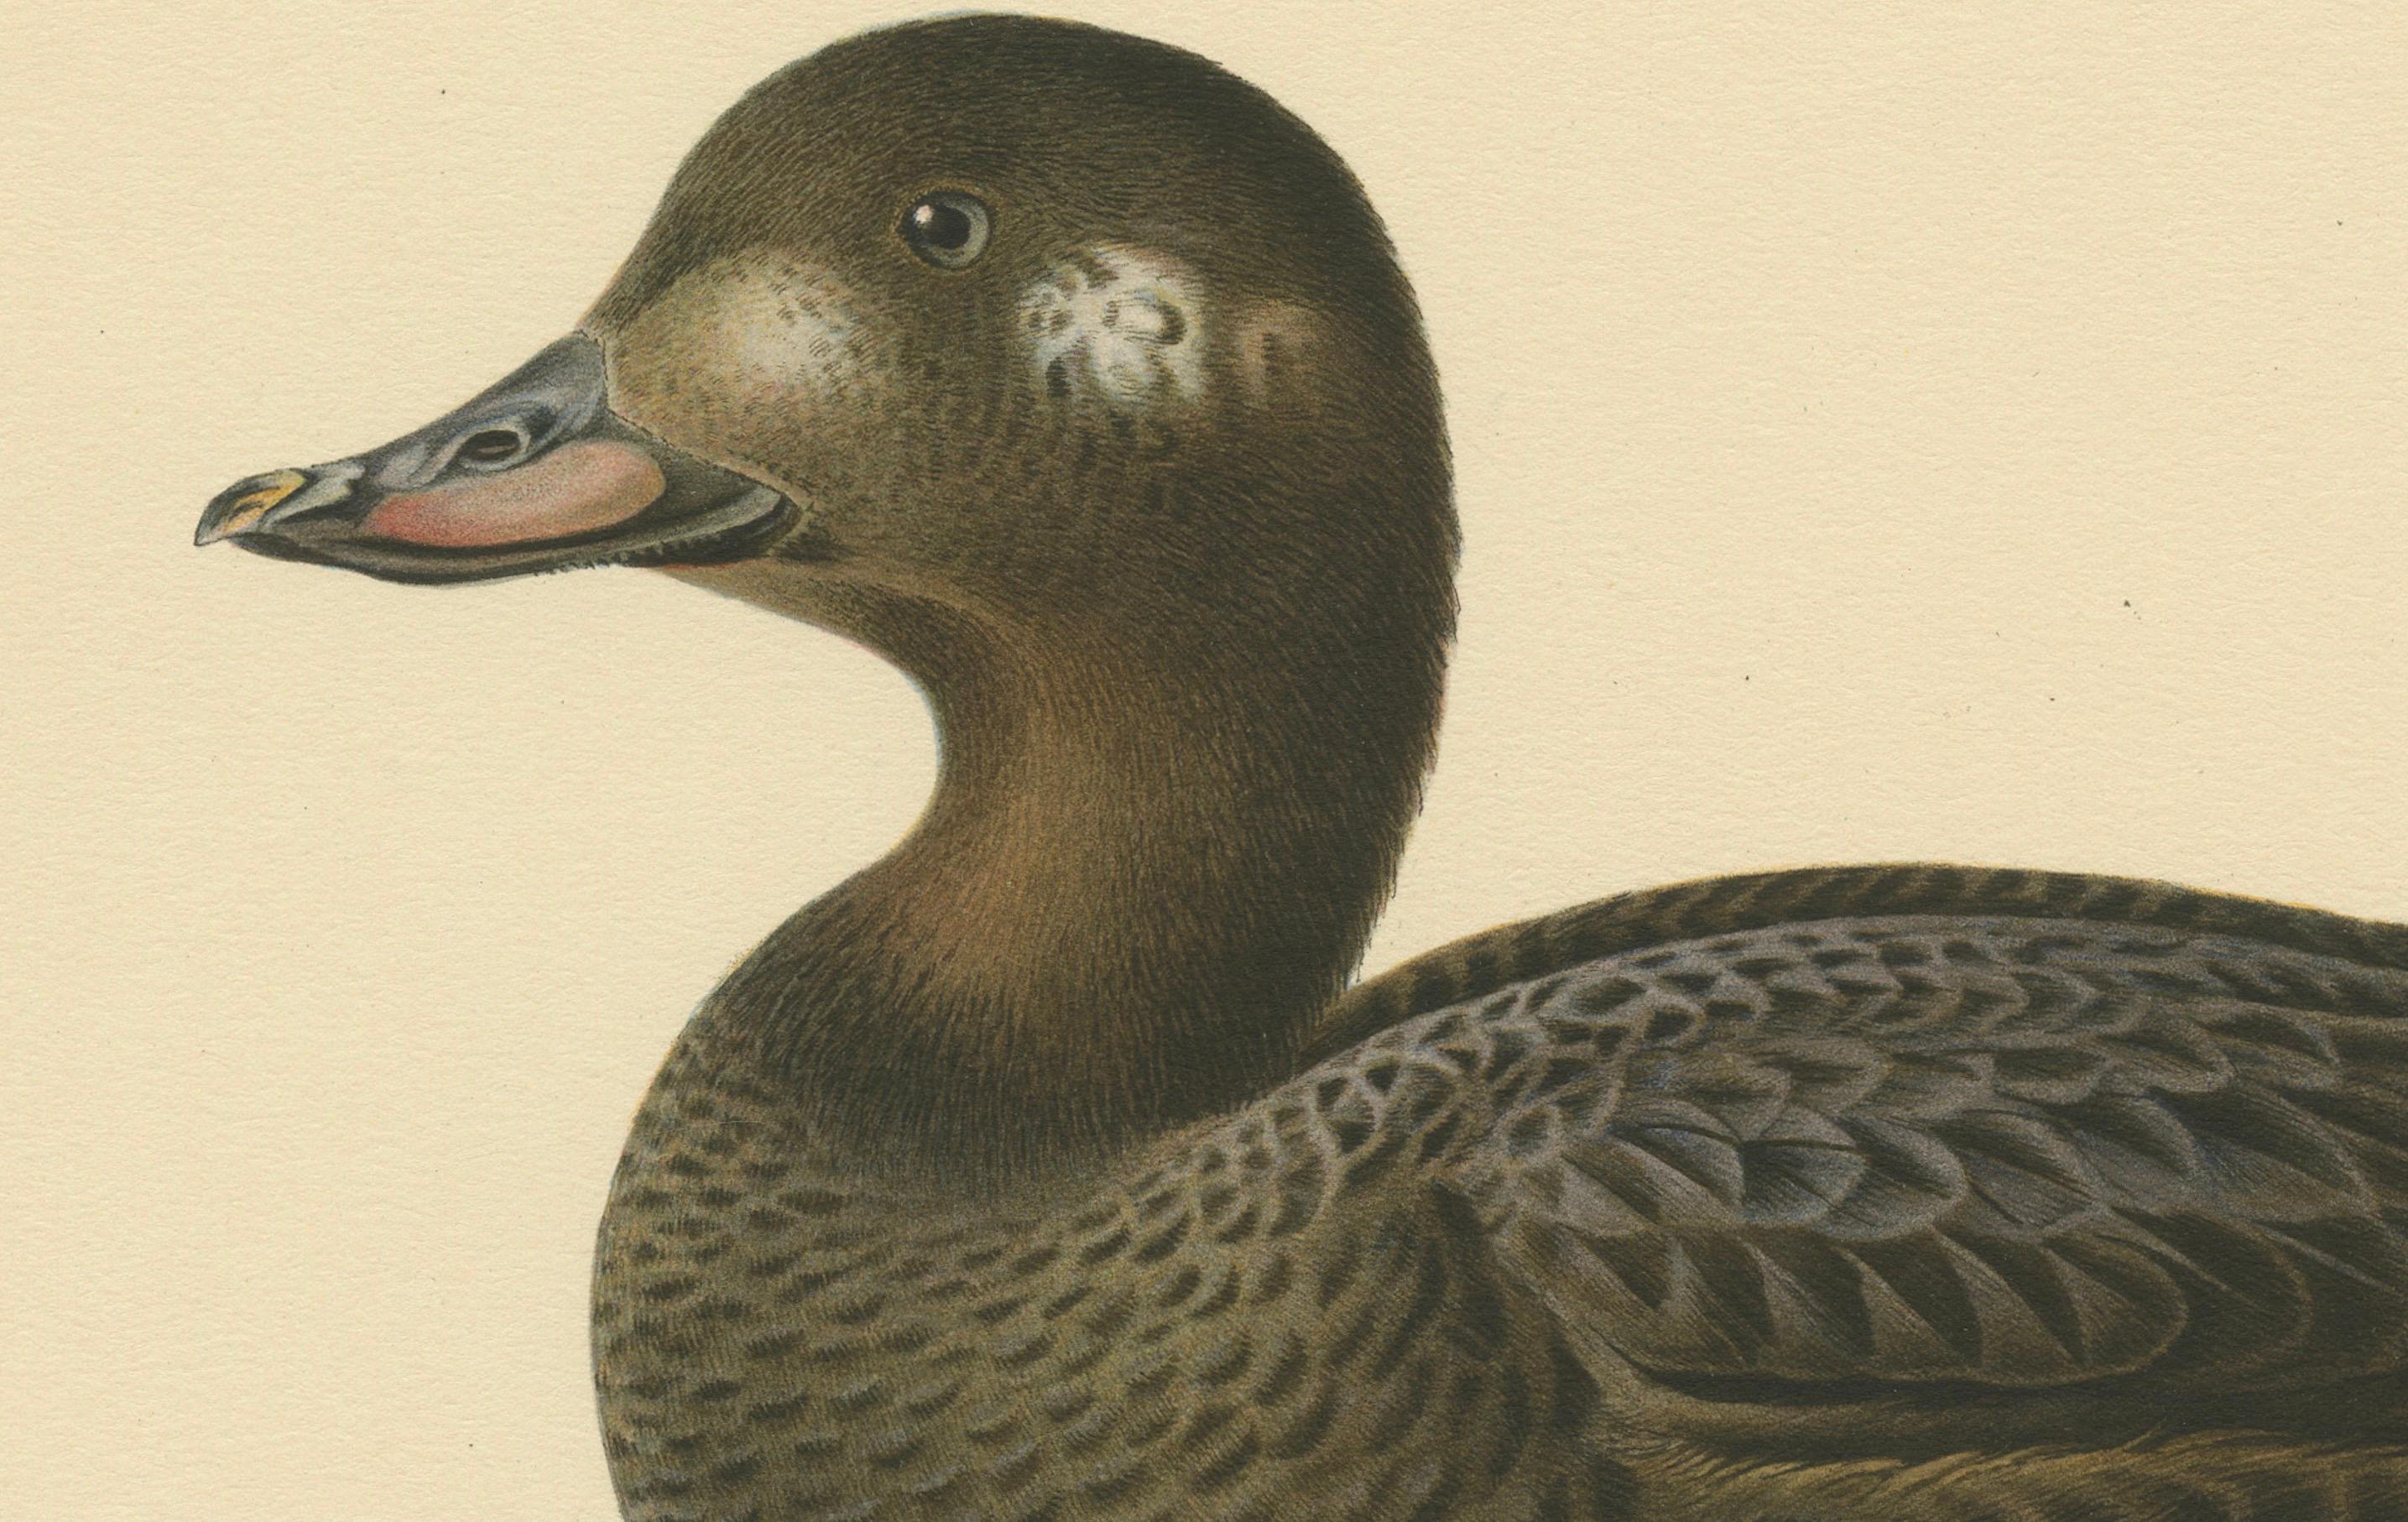 This print features the Velvet Scoter, scientifically known as Oidemia fusca, represented with precision and artistry. The bird is depicted in a resting position with a full side profile, showcasing its rounded body, thick neck, and broad bill. The